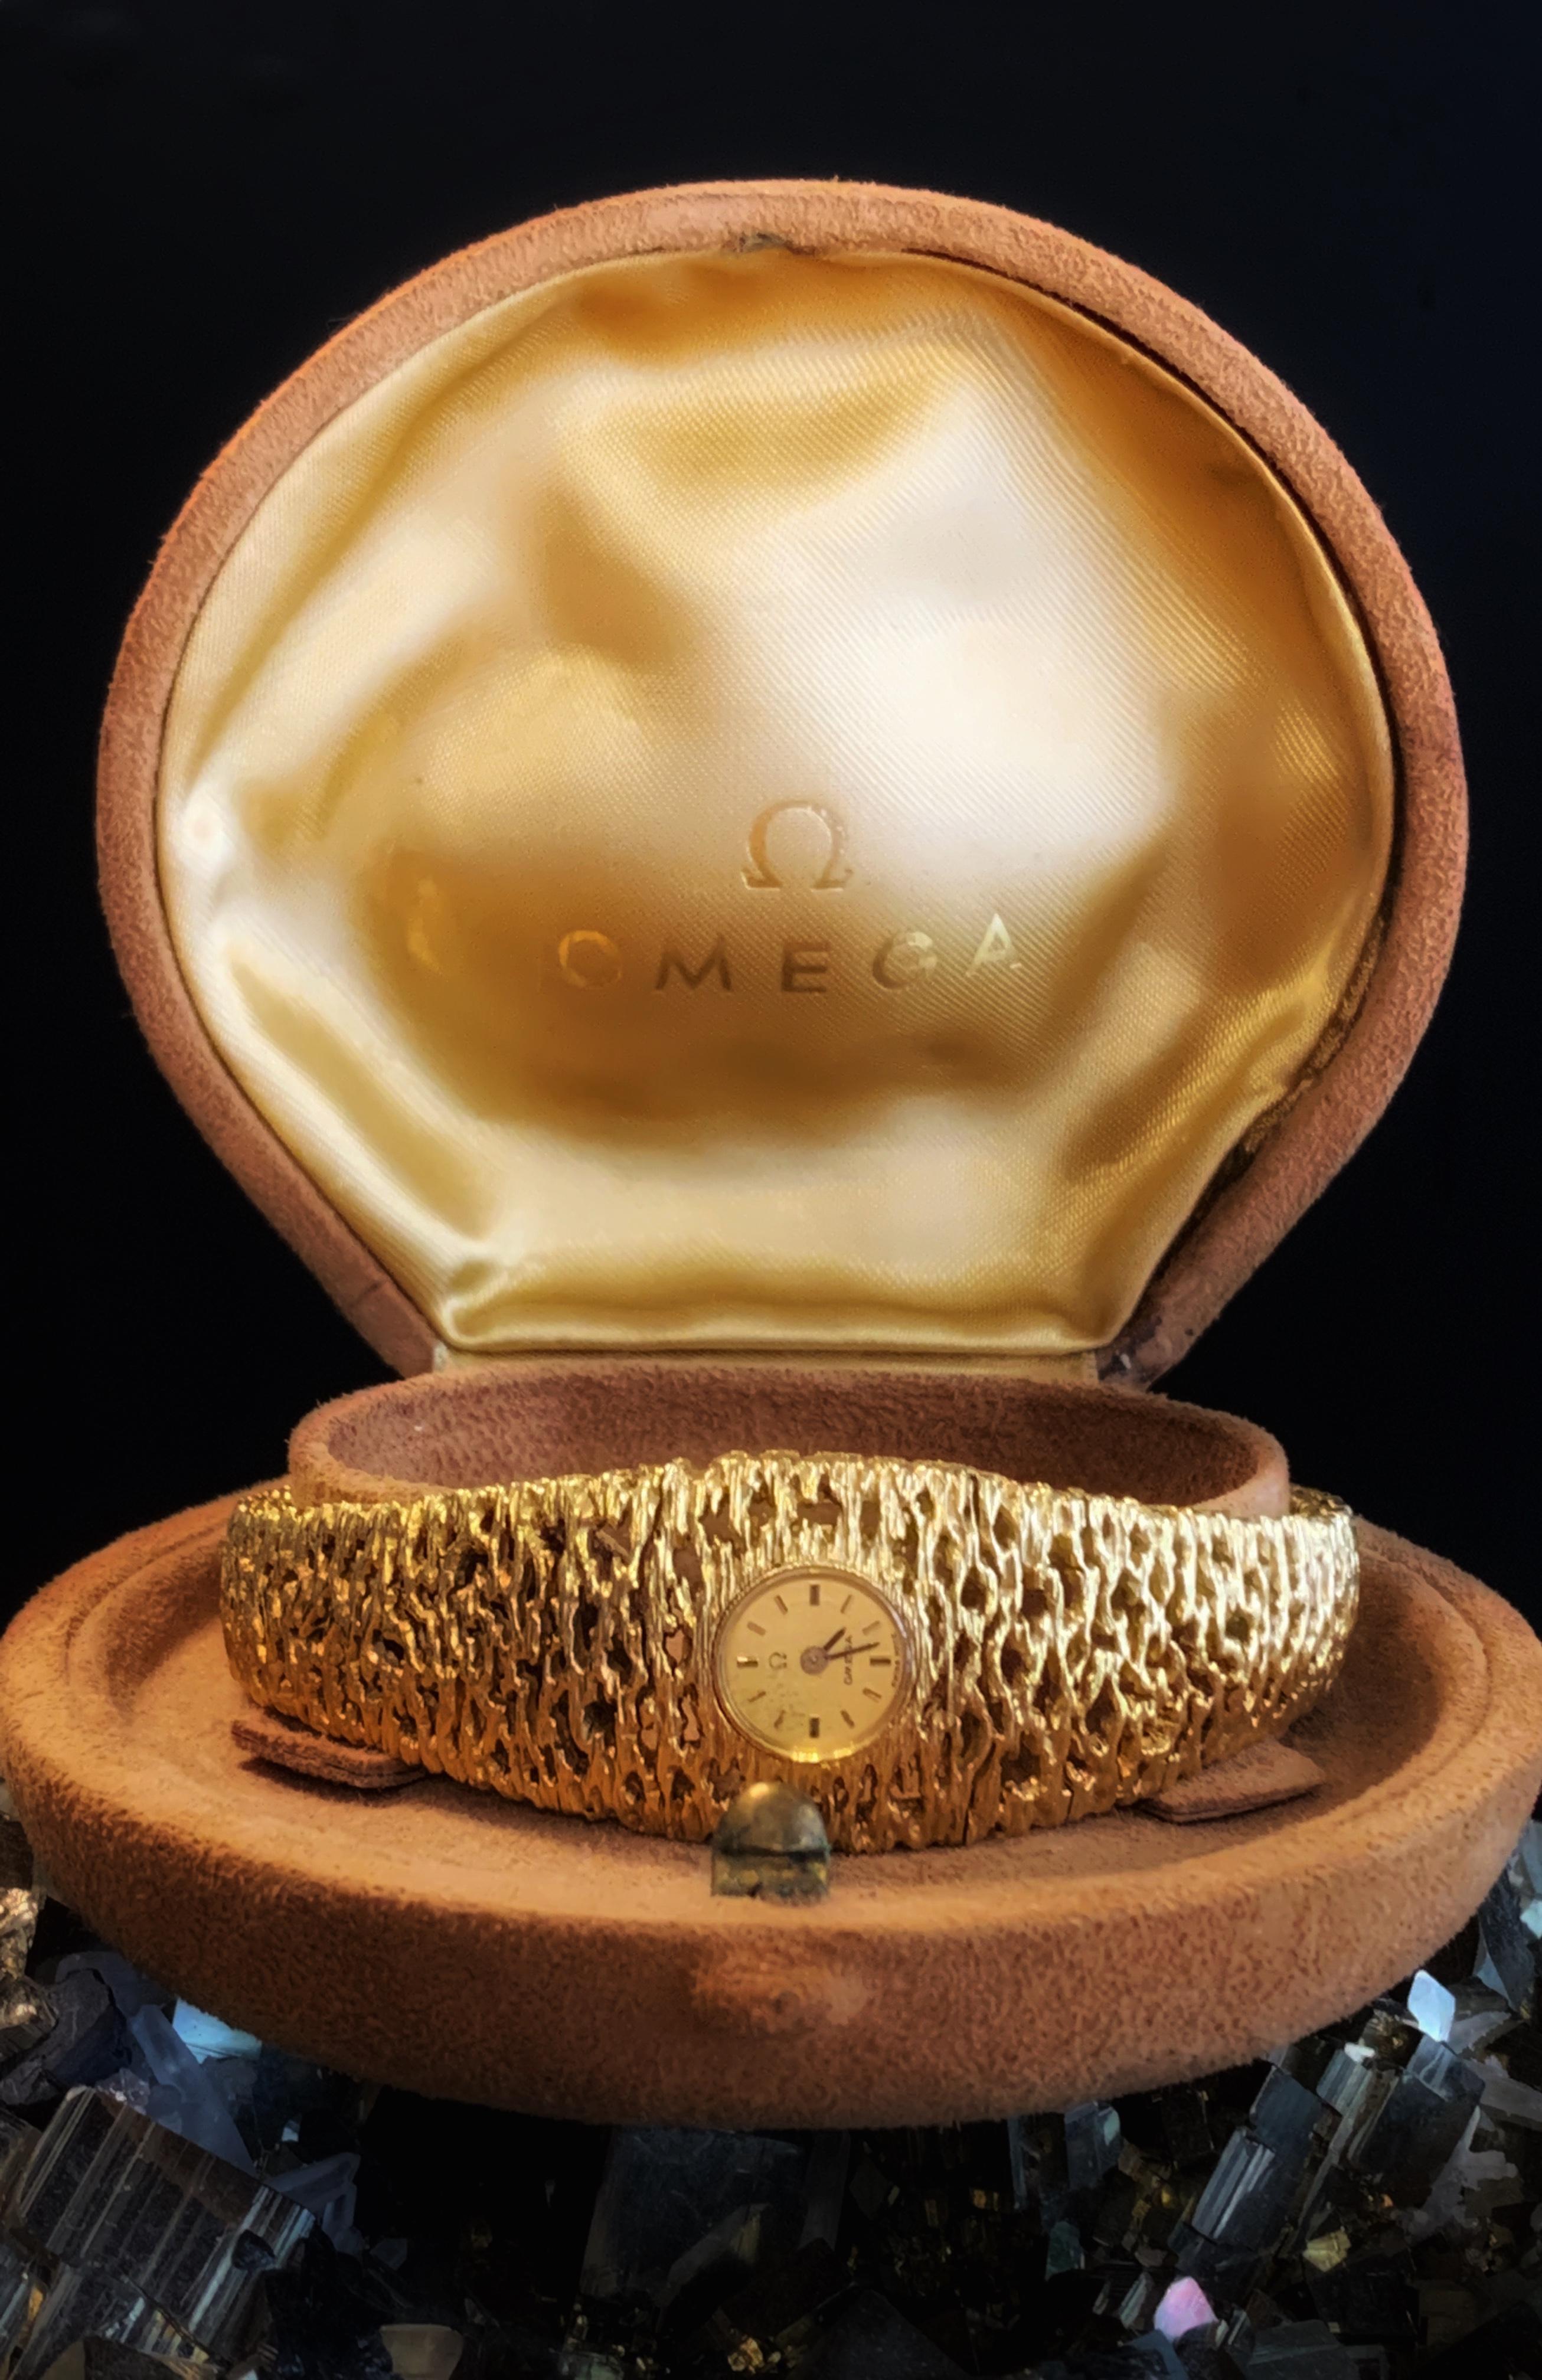 An extremely rare vintage Omega ladies watch created by Gilbert Albert. The watch is made of 18K yellow gold. It'a mechanical watch. Elegant design. Interesting for the vintage collectors and lovers and also for those who appreciate timeless and